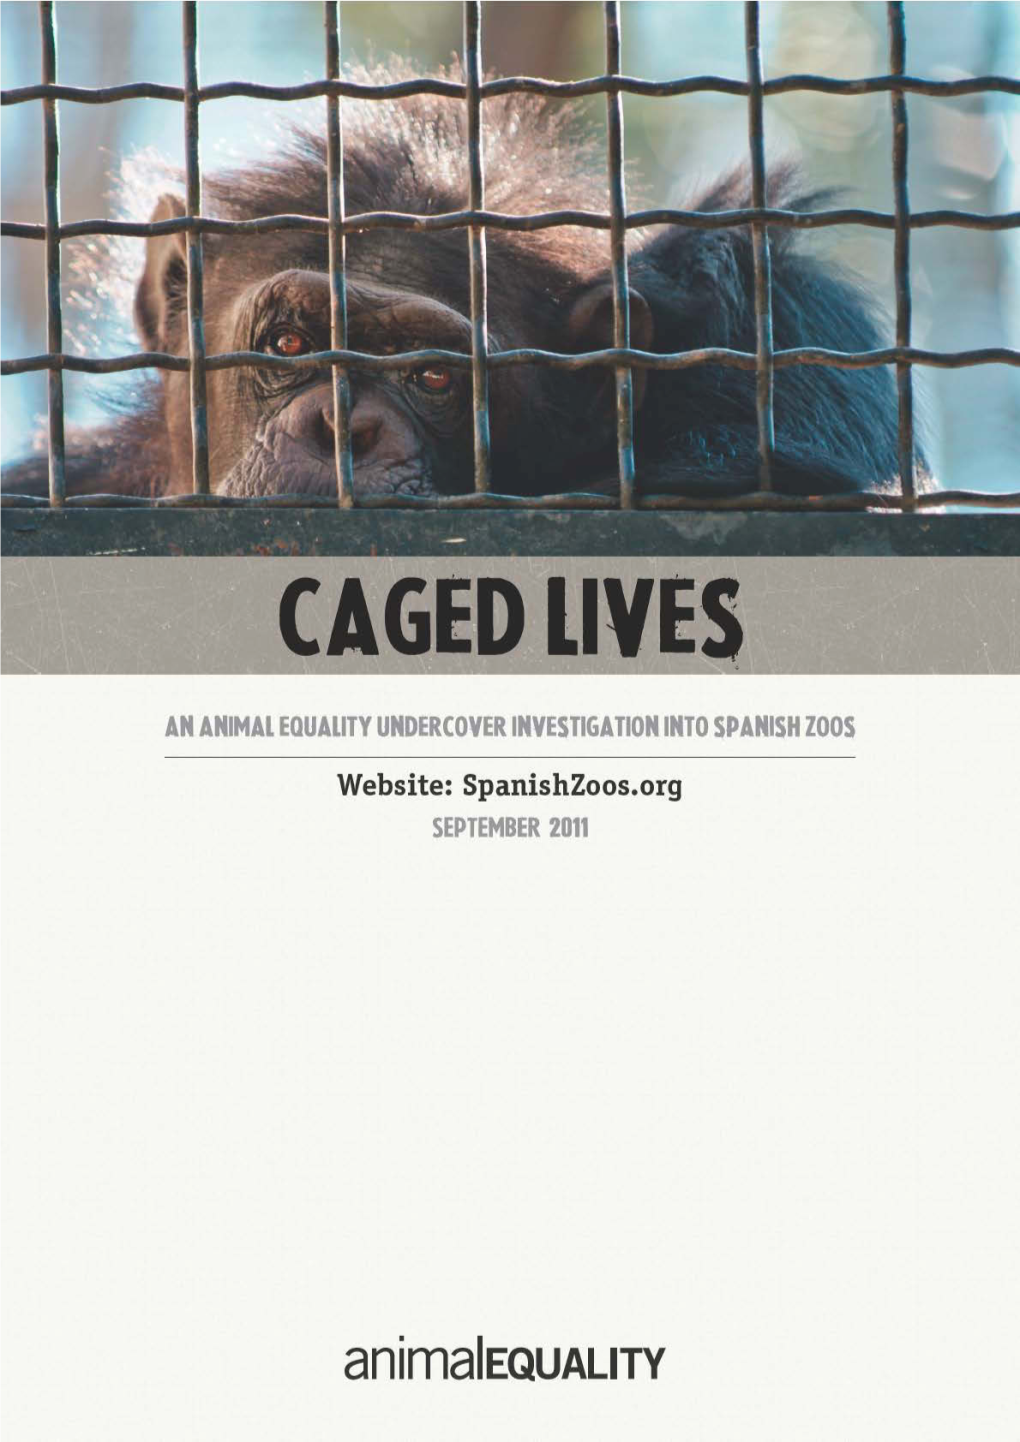 Caged Lives, an Animal Equality Undercover Investigation Into Spanish Zoos